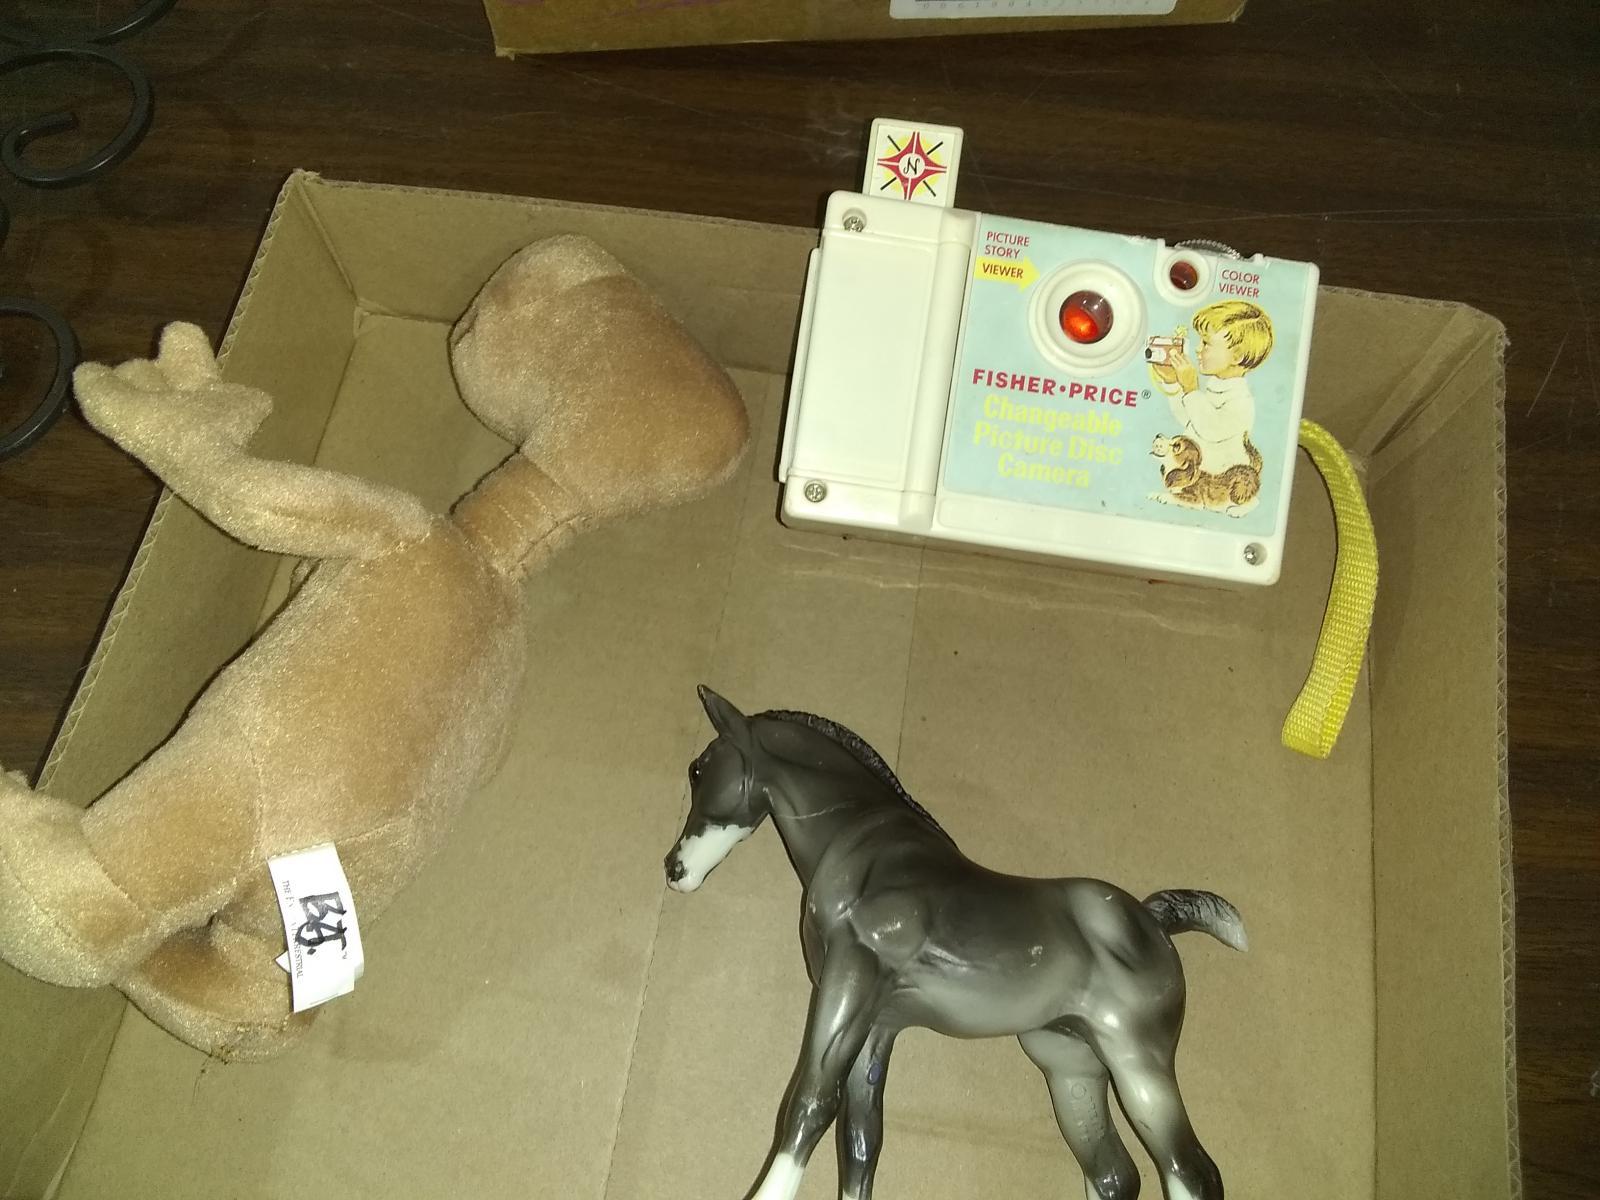 BL-Assorted Plush Animals, Fisher Price Camera, Toy Horse